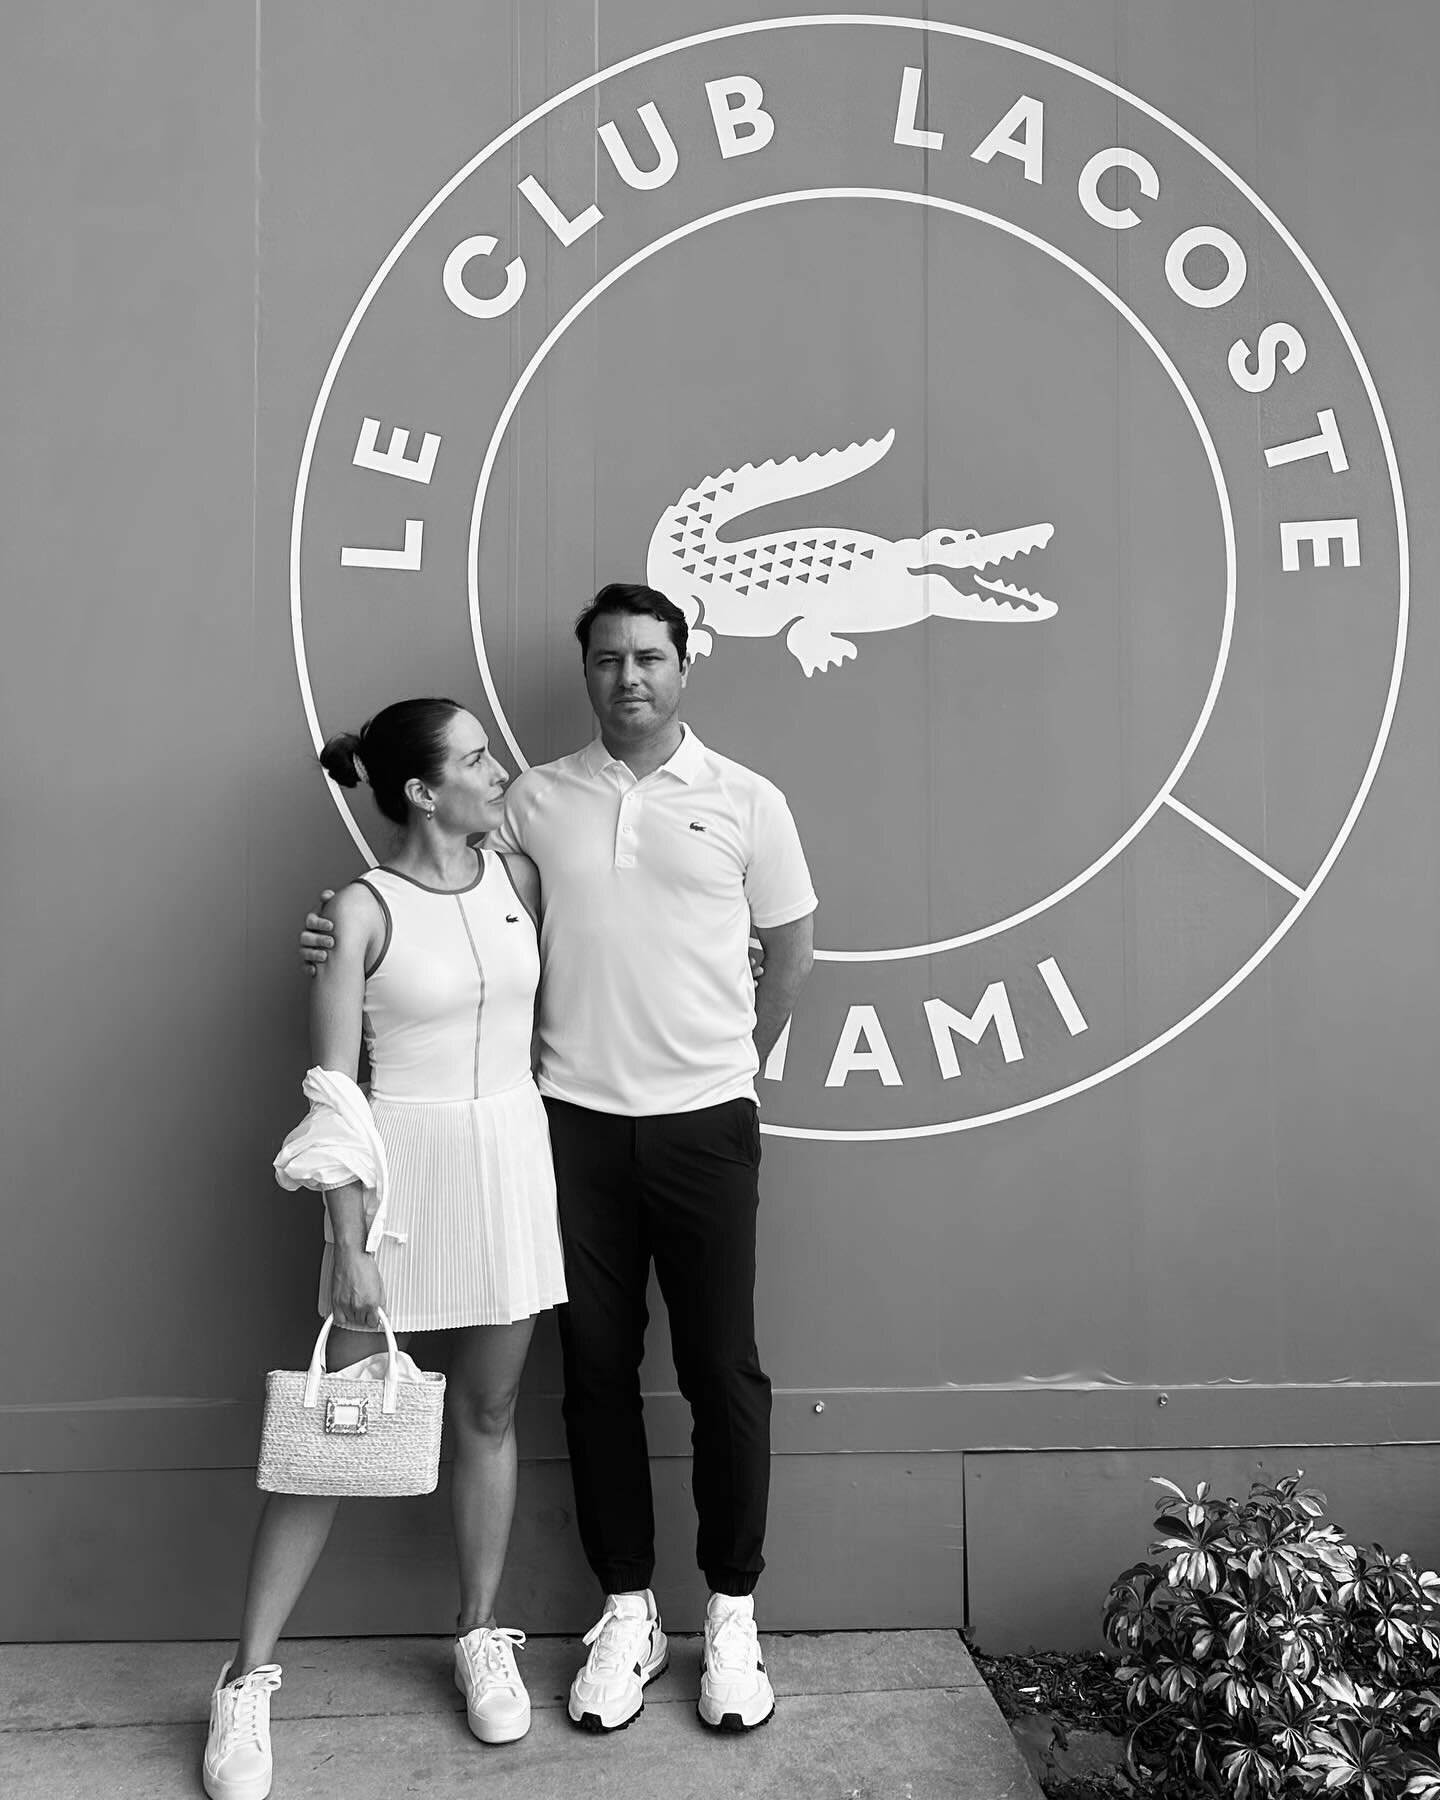 Could not have asked for a more special five year wedding anniversary - thank you thank you thank you @lacoste for such an incredibly fun and unforgettable evening at The Miami Open. Go Dimitrov! 🙌🏼🩷🎾😭